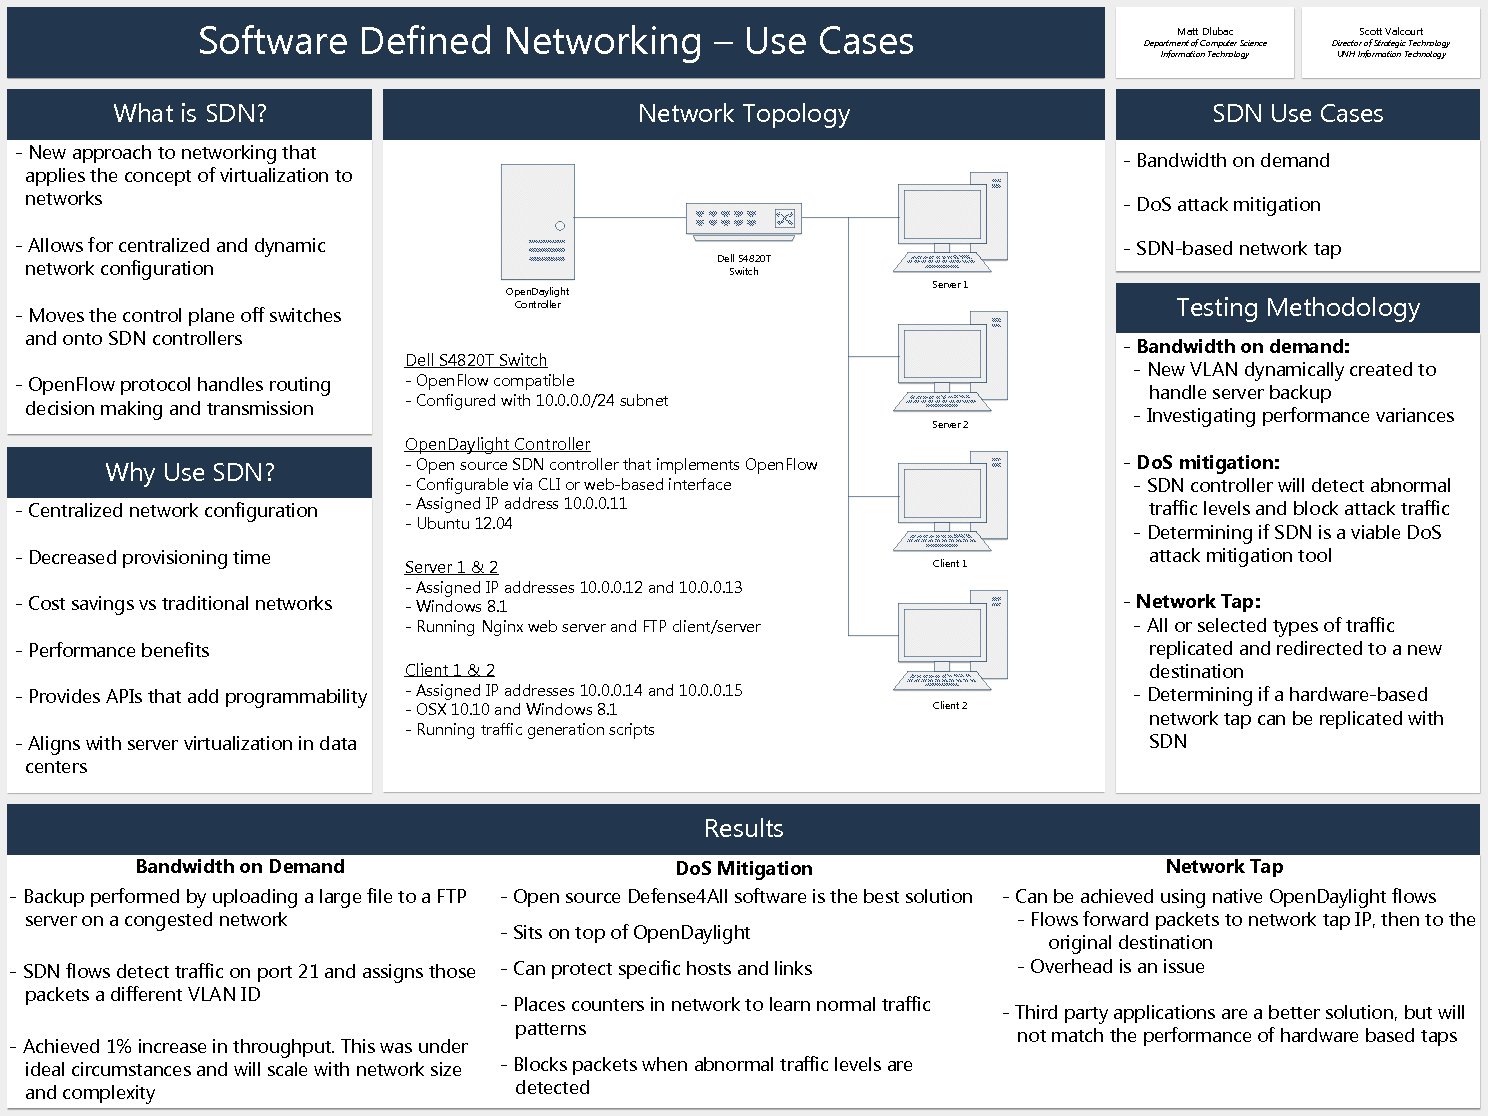 Software Defined Networking - Use Cases by mti39